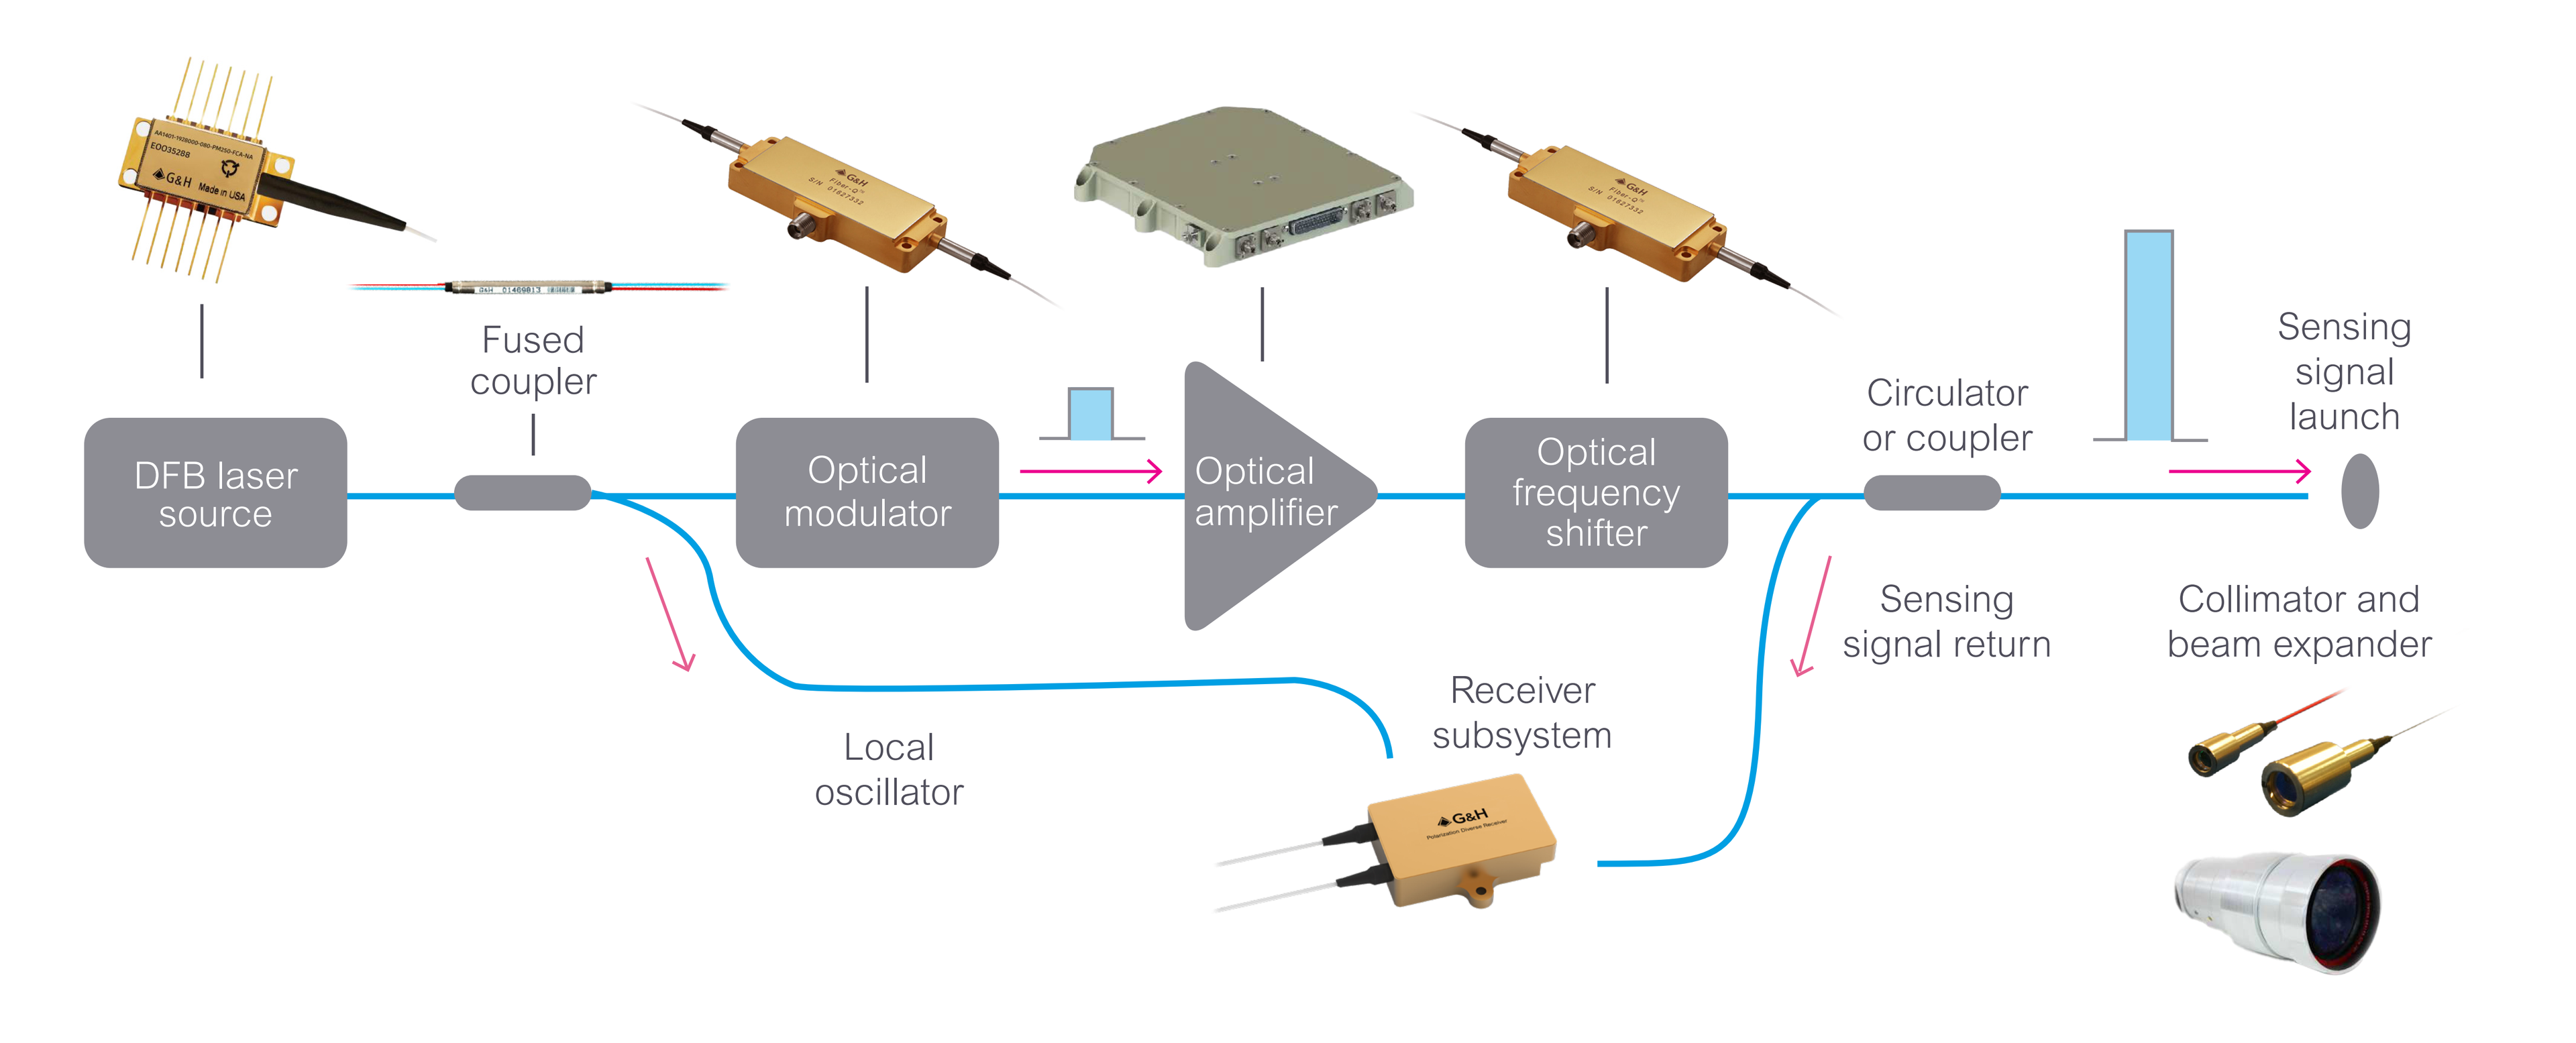 Diagram showing the components making up an lidar or sensing system.